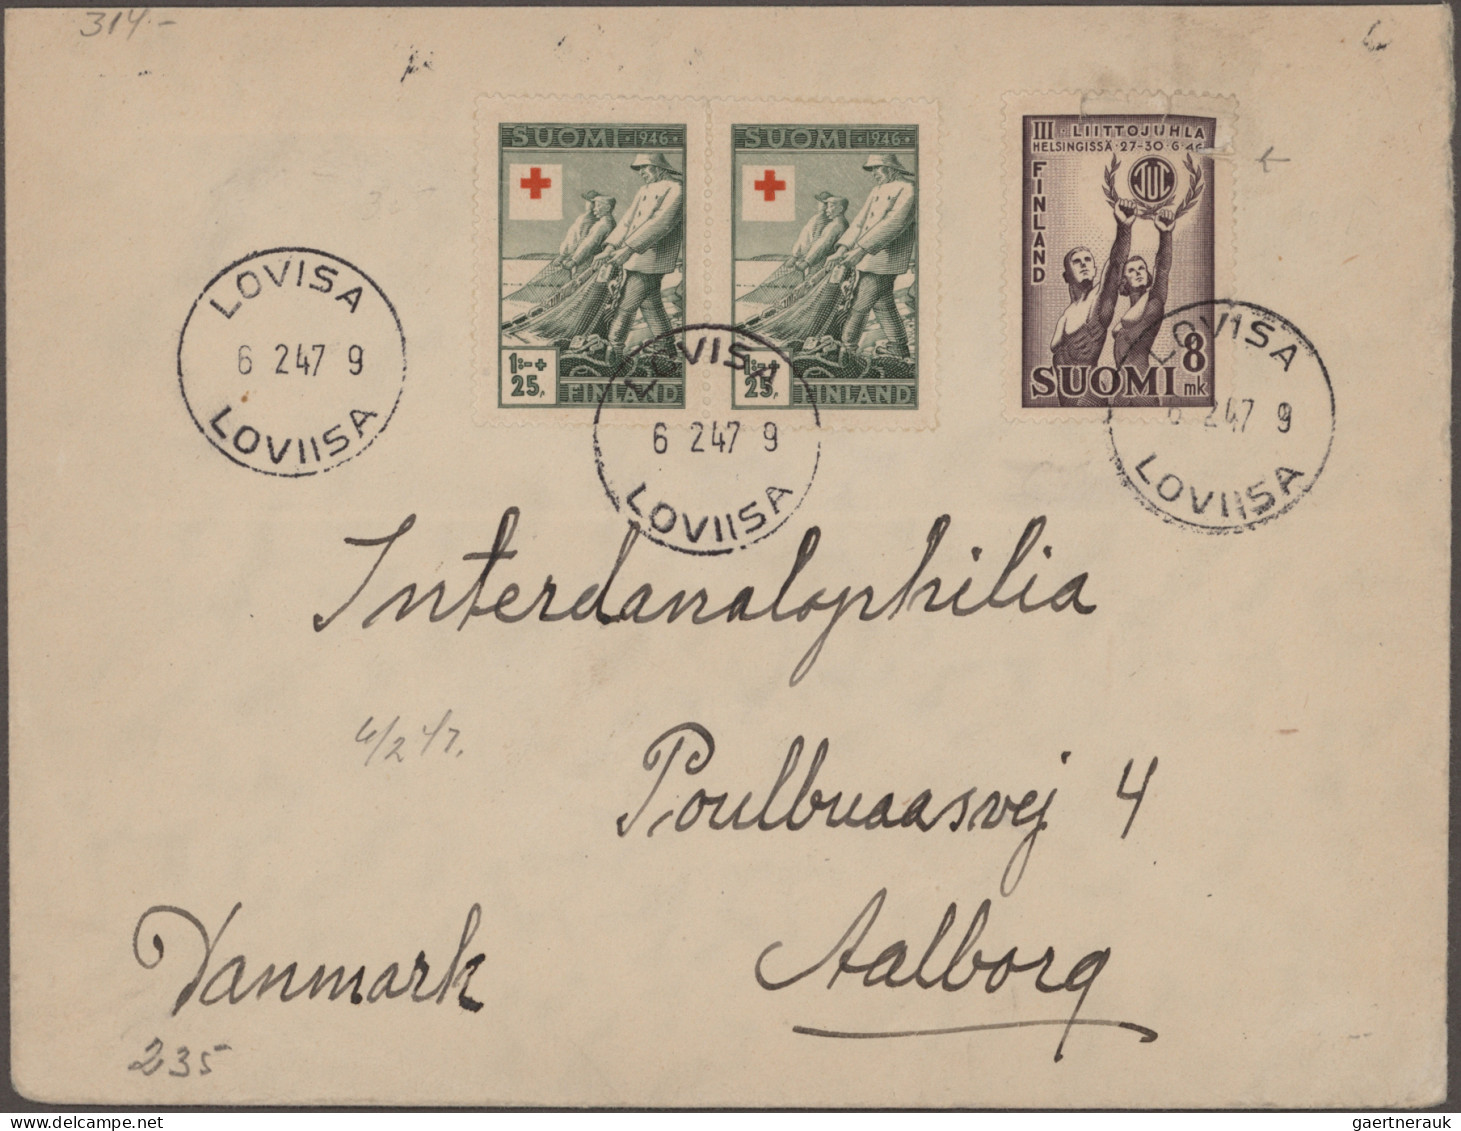 Finland: 1884/2013, balance of apprx. 370 covers/cards/stationeries, showing a l